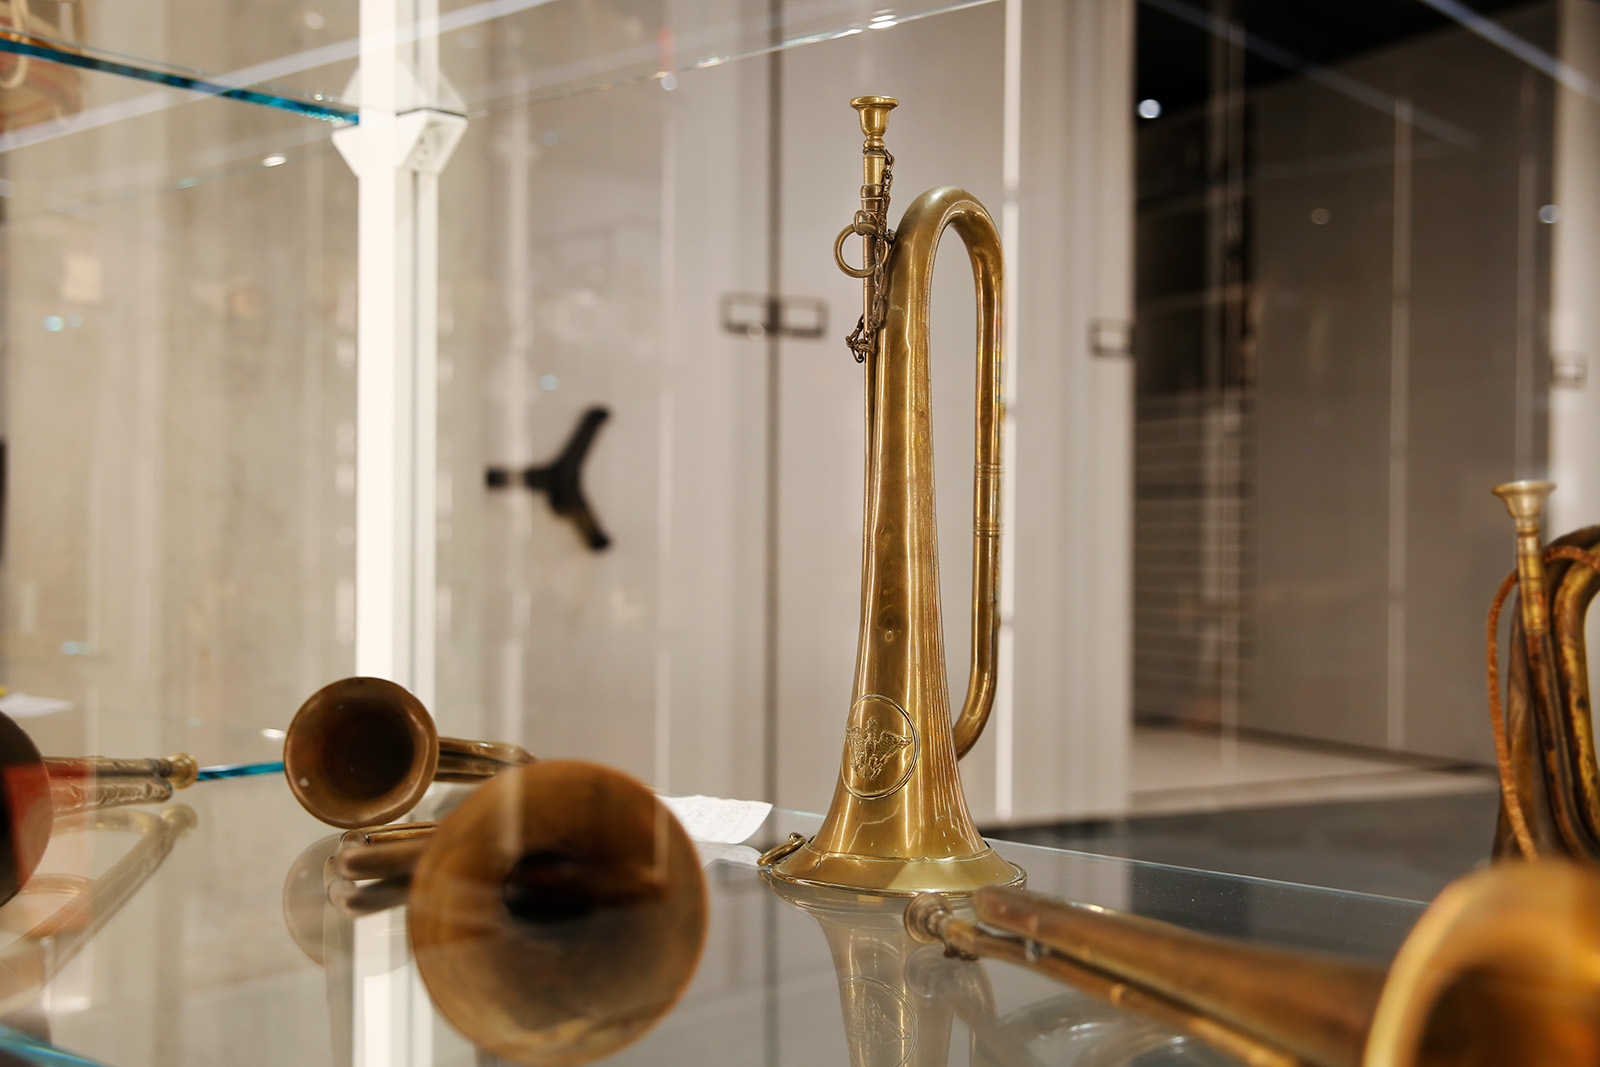 Modern photograph of a glass display case featuring a bugle resting upright on a glass shelf surrounded by more bugles